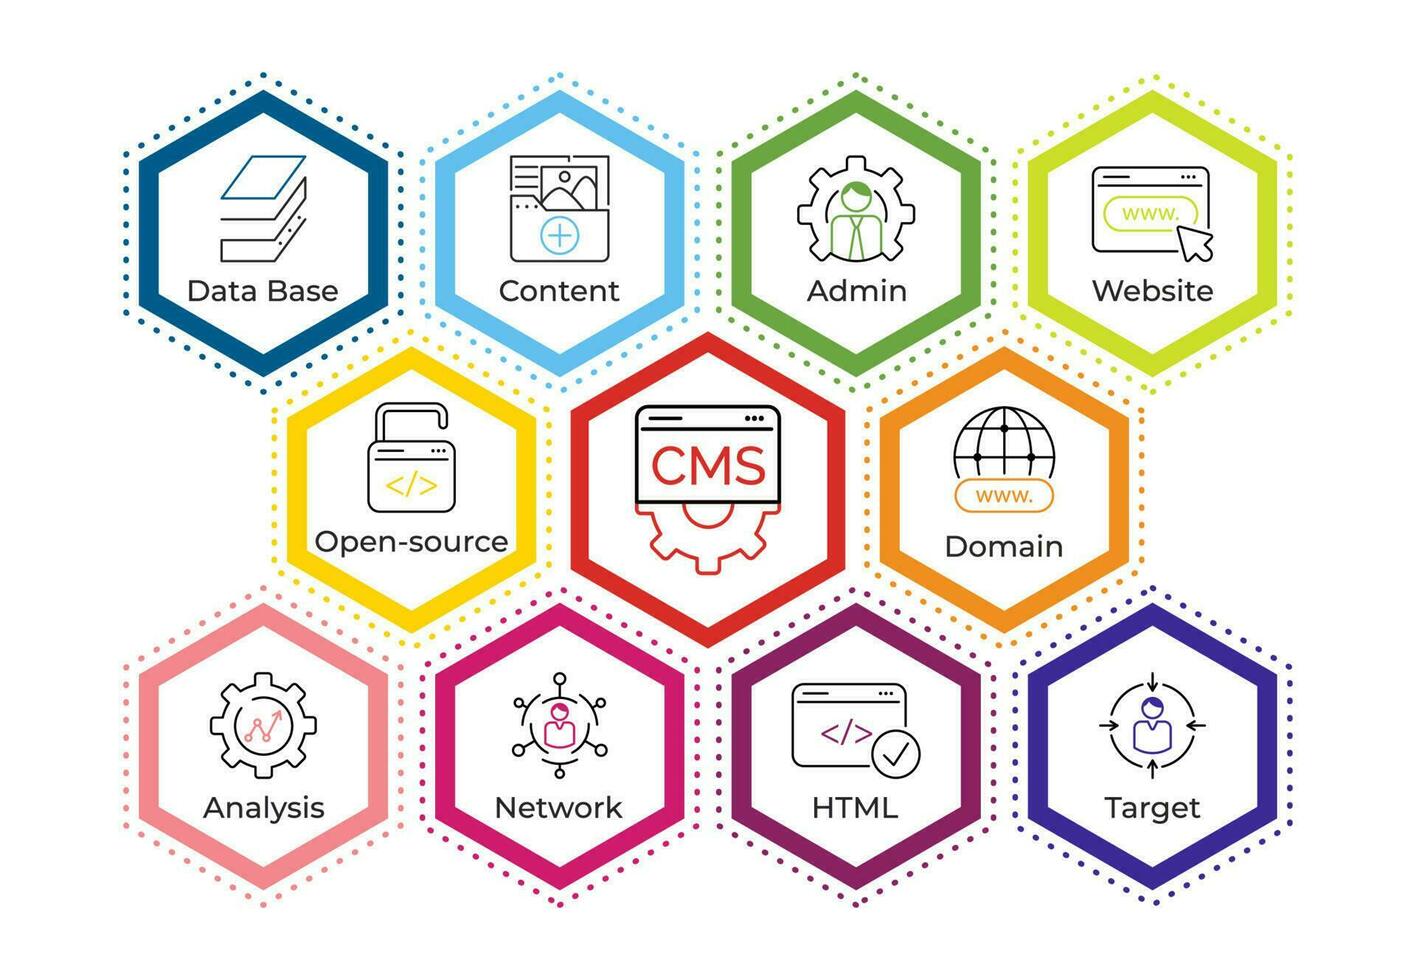 CMS - Content management system concept. Banner with keywords and icons. Publishing content, blog promotion, data administration and seo optimization. Network internet technology for business. Vector